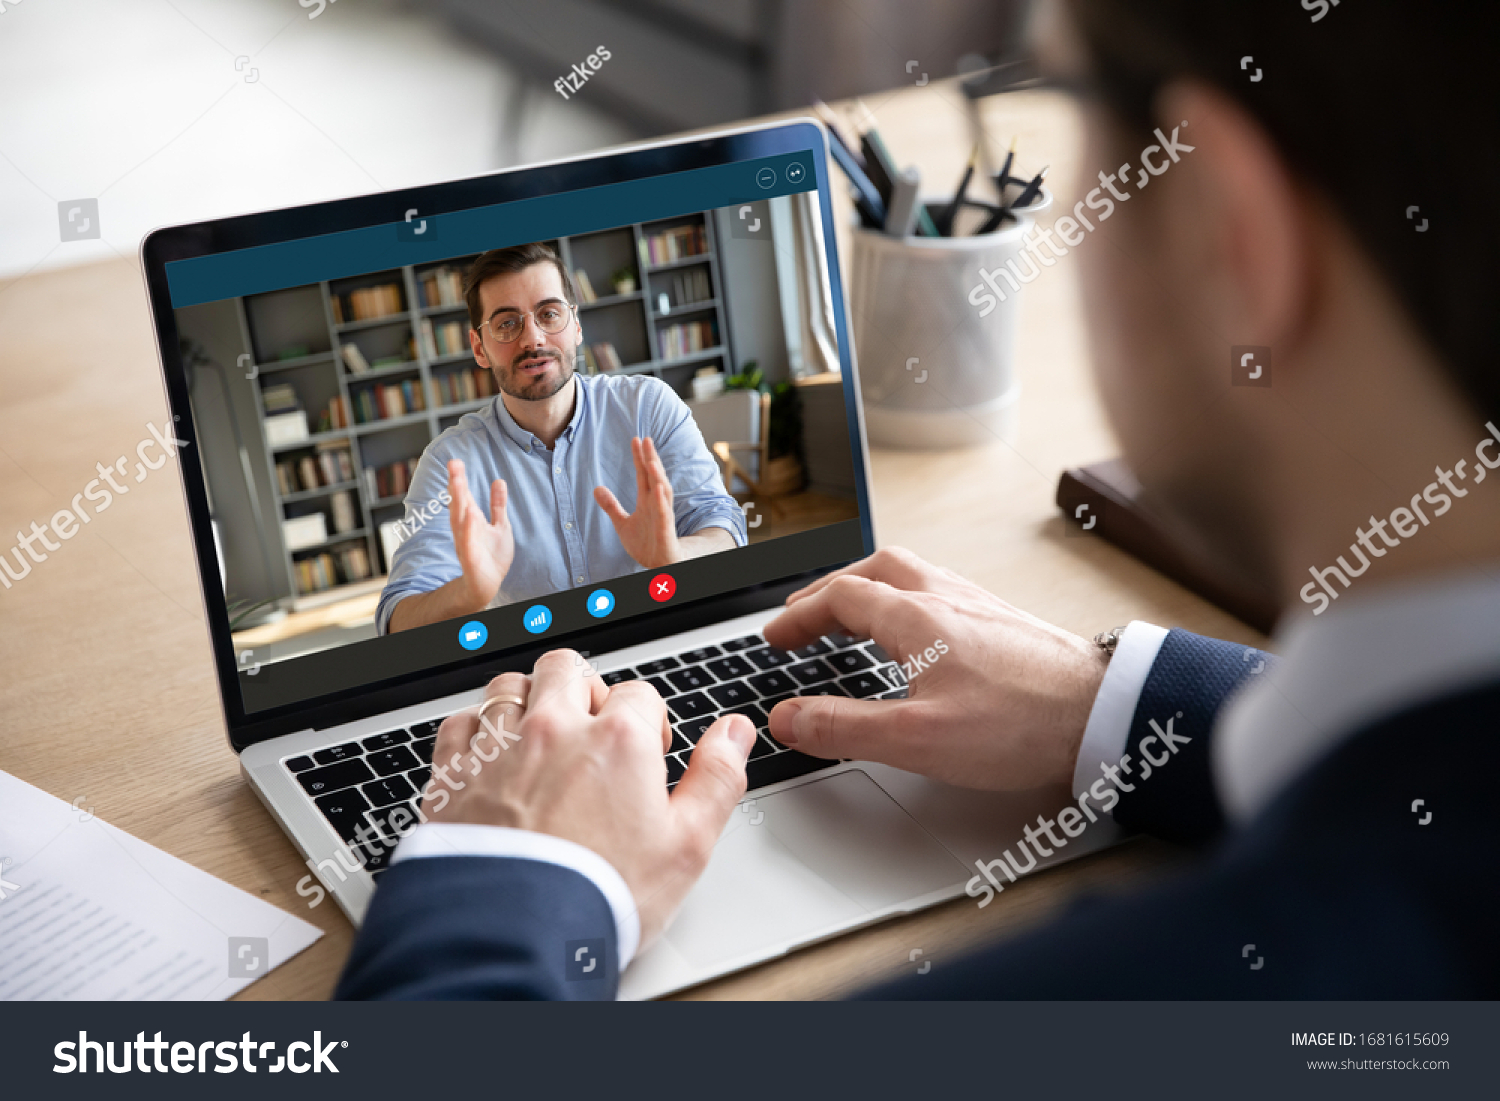 Back view of businessman talk with male business partner using video call on laptop discuss work project online, male client talk with colleague or coworker, speak on webcam conference on computer #1681615609